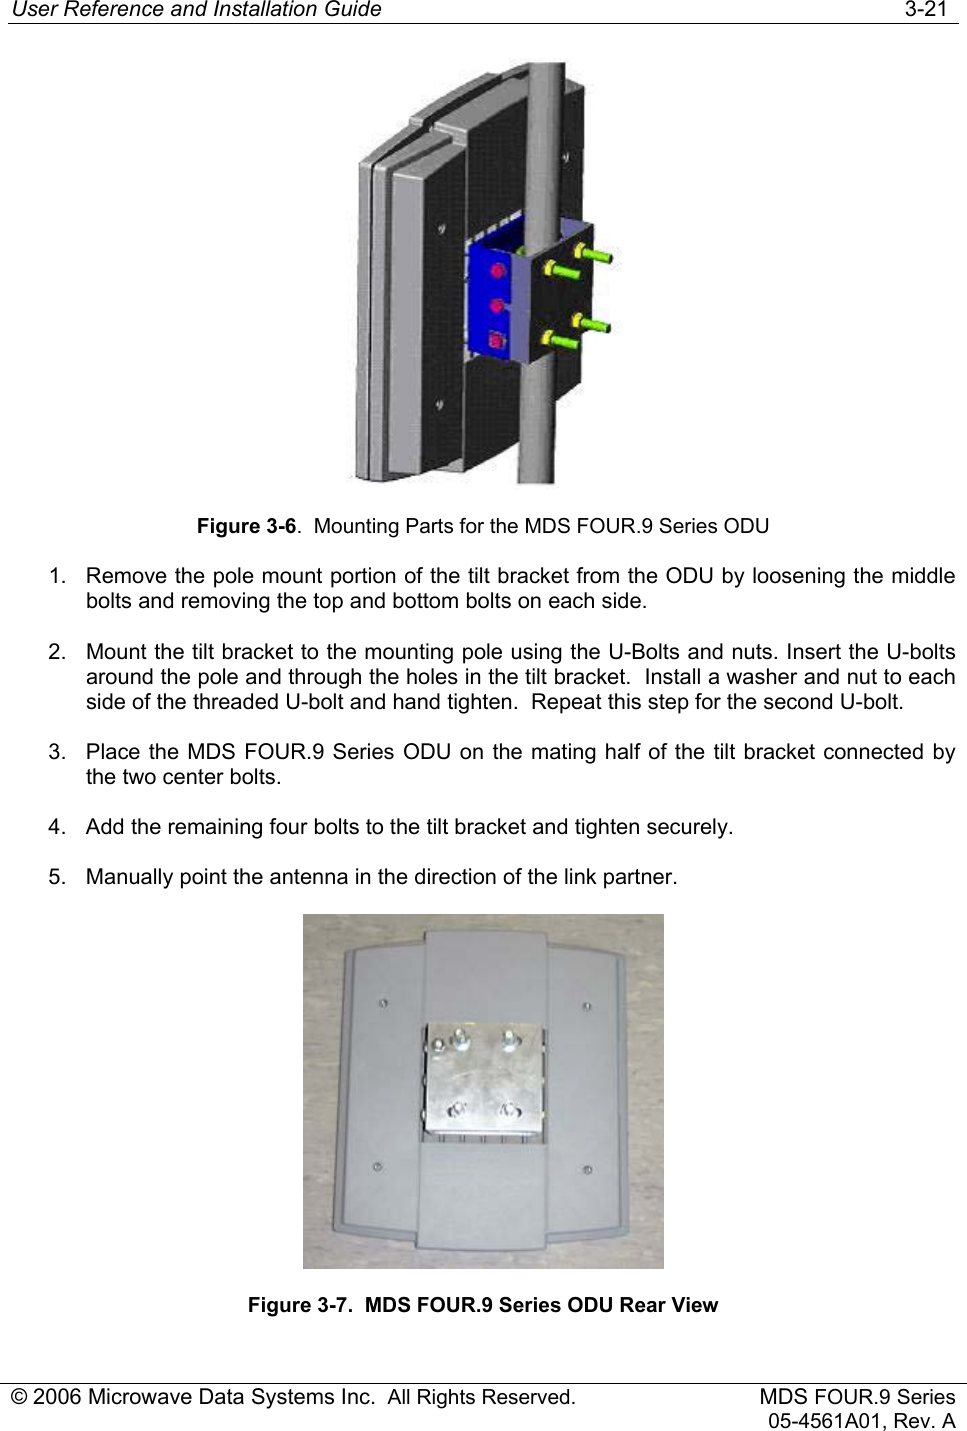 User Reference and Installation Guide   3-21 © 2006 Microwave Data Systems Inc.  All Rights Reserved. MDS FOUR.9 Series 05-4561A01, Rev. A  Figure 3-6.  Mounting Parts for the MDS FOUR.9 Series ODU 1.  Remove the pole mount portion of the tilt bracket from the ODU by loosening the middle bolts and removing the top and bottom bolts on each side. 2.  Mount the tilt bracket to the mounting pole using the U-Bolts and nuts. Insert the U-bolts around the pole and through the holes in the tilt bracket.  Install a washer and nut to each side of the threaded U-bolt and hand tighten.  Repeat this step for the second U-bolt. 3.  Place the MDS FOUR.9 Series ODU on the mating half of the tilt bracket connected by the two center bolts. 4.  Add the remaining four bolts to the tilt bracket and tighten securely. 5.  Manually point the antenna in the direction of the link partner.  Figure 3-7.  MDS FOUR.9 Series ODU Rear View  